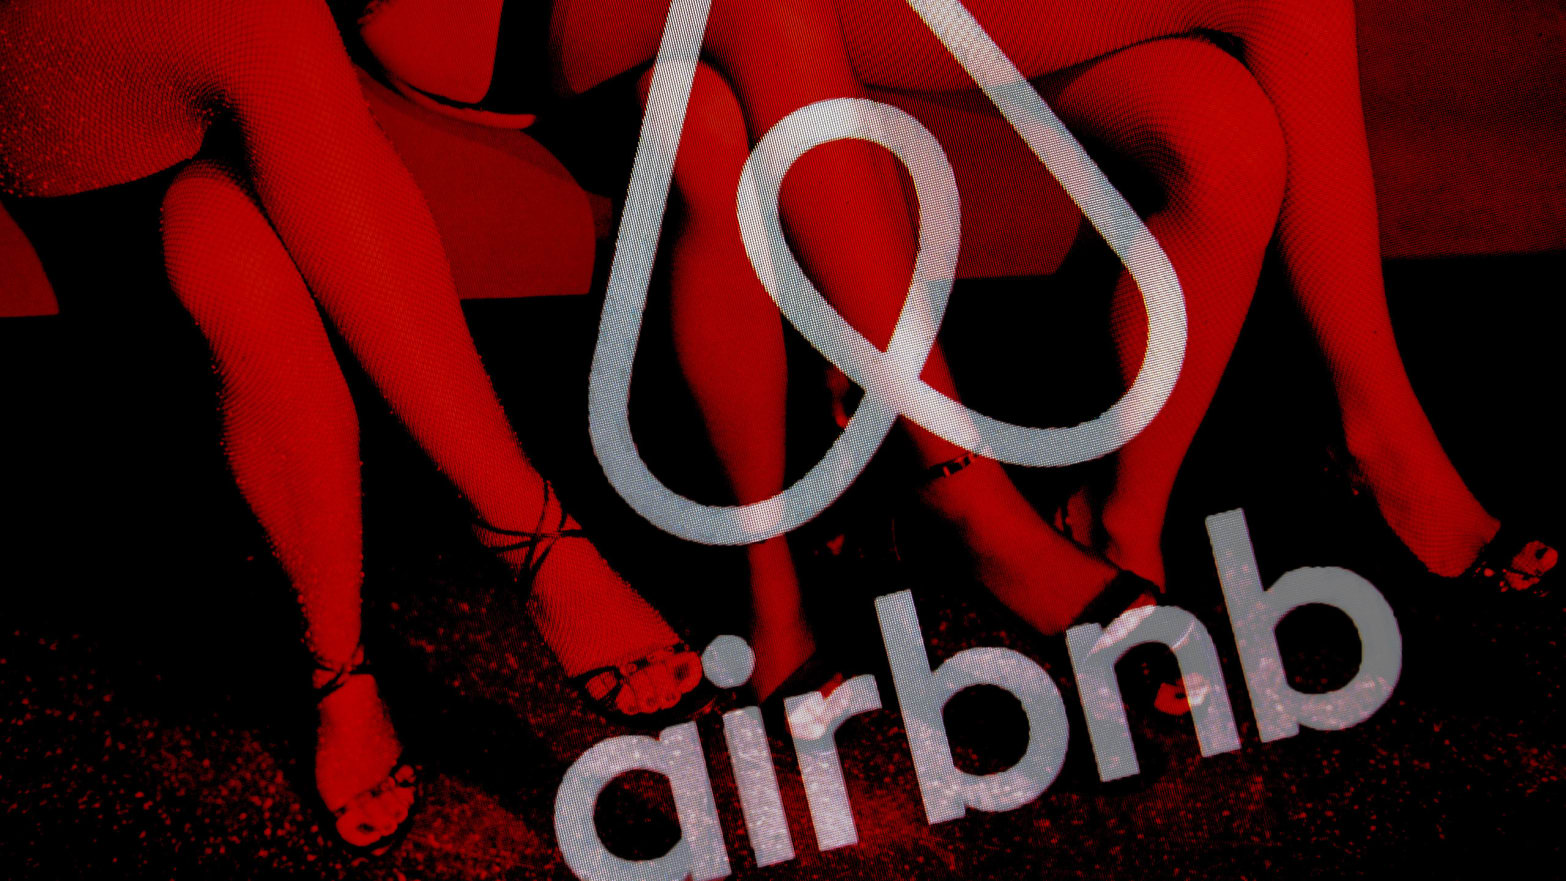 Graphic Porn - Airbnb's War on Porn Stars: 'They Locked Me Out'